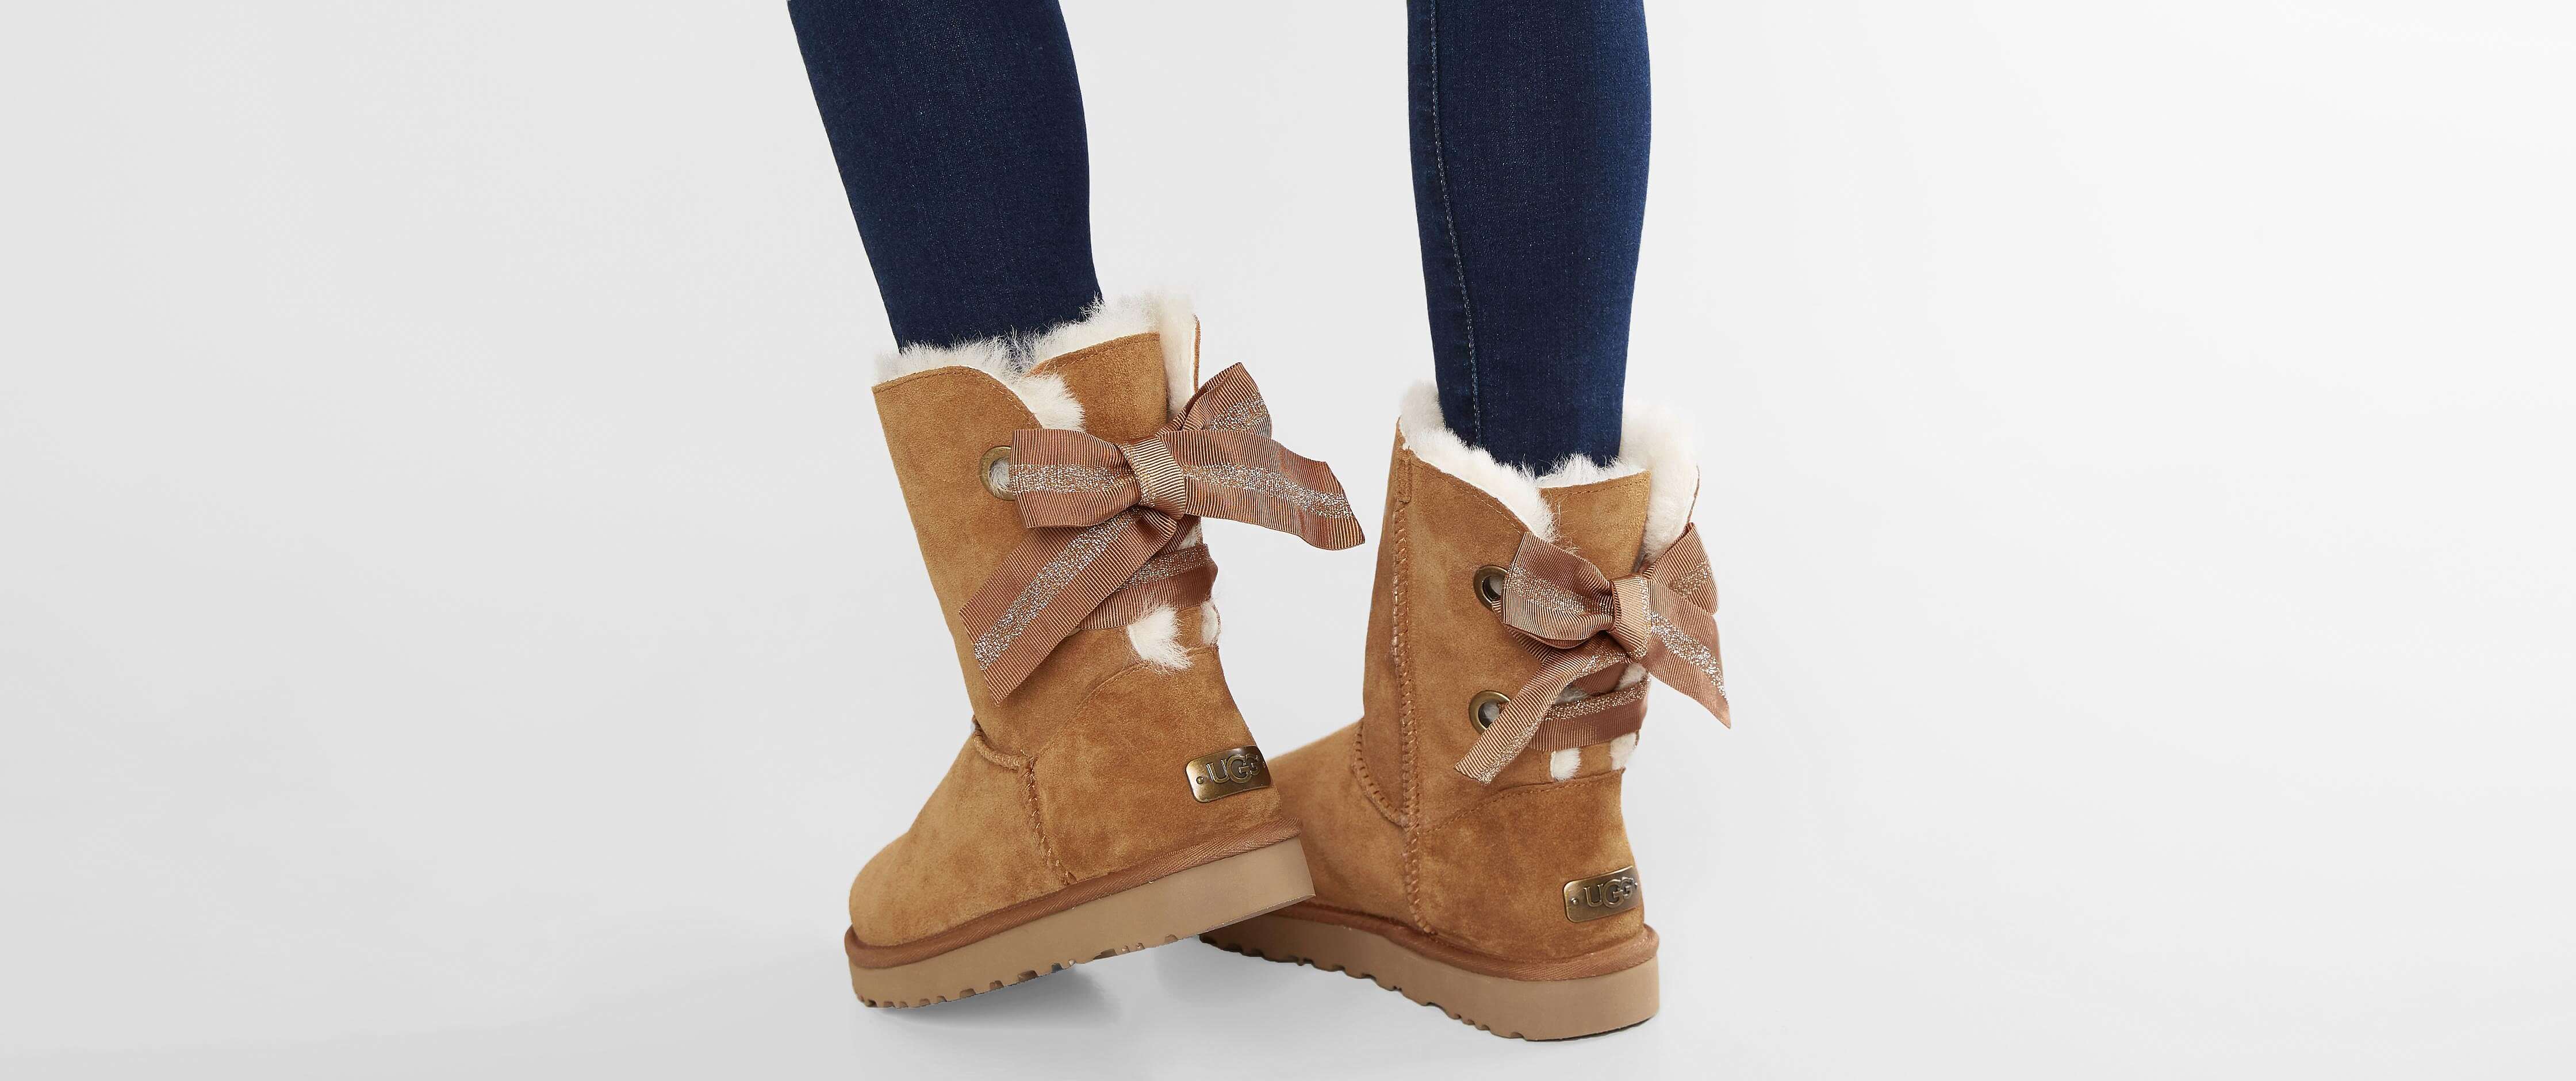 ugg boots with laces up the back